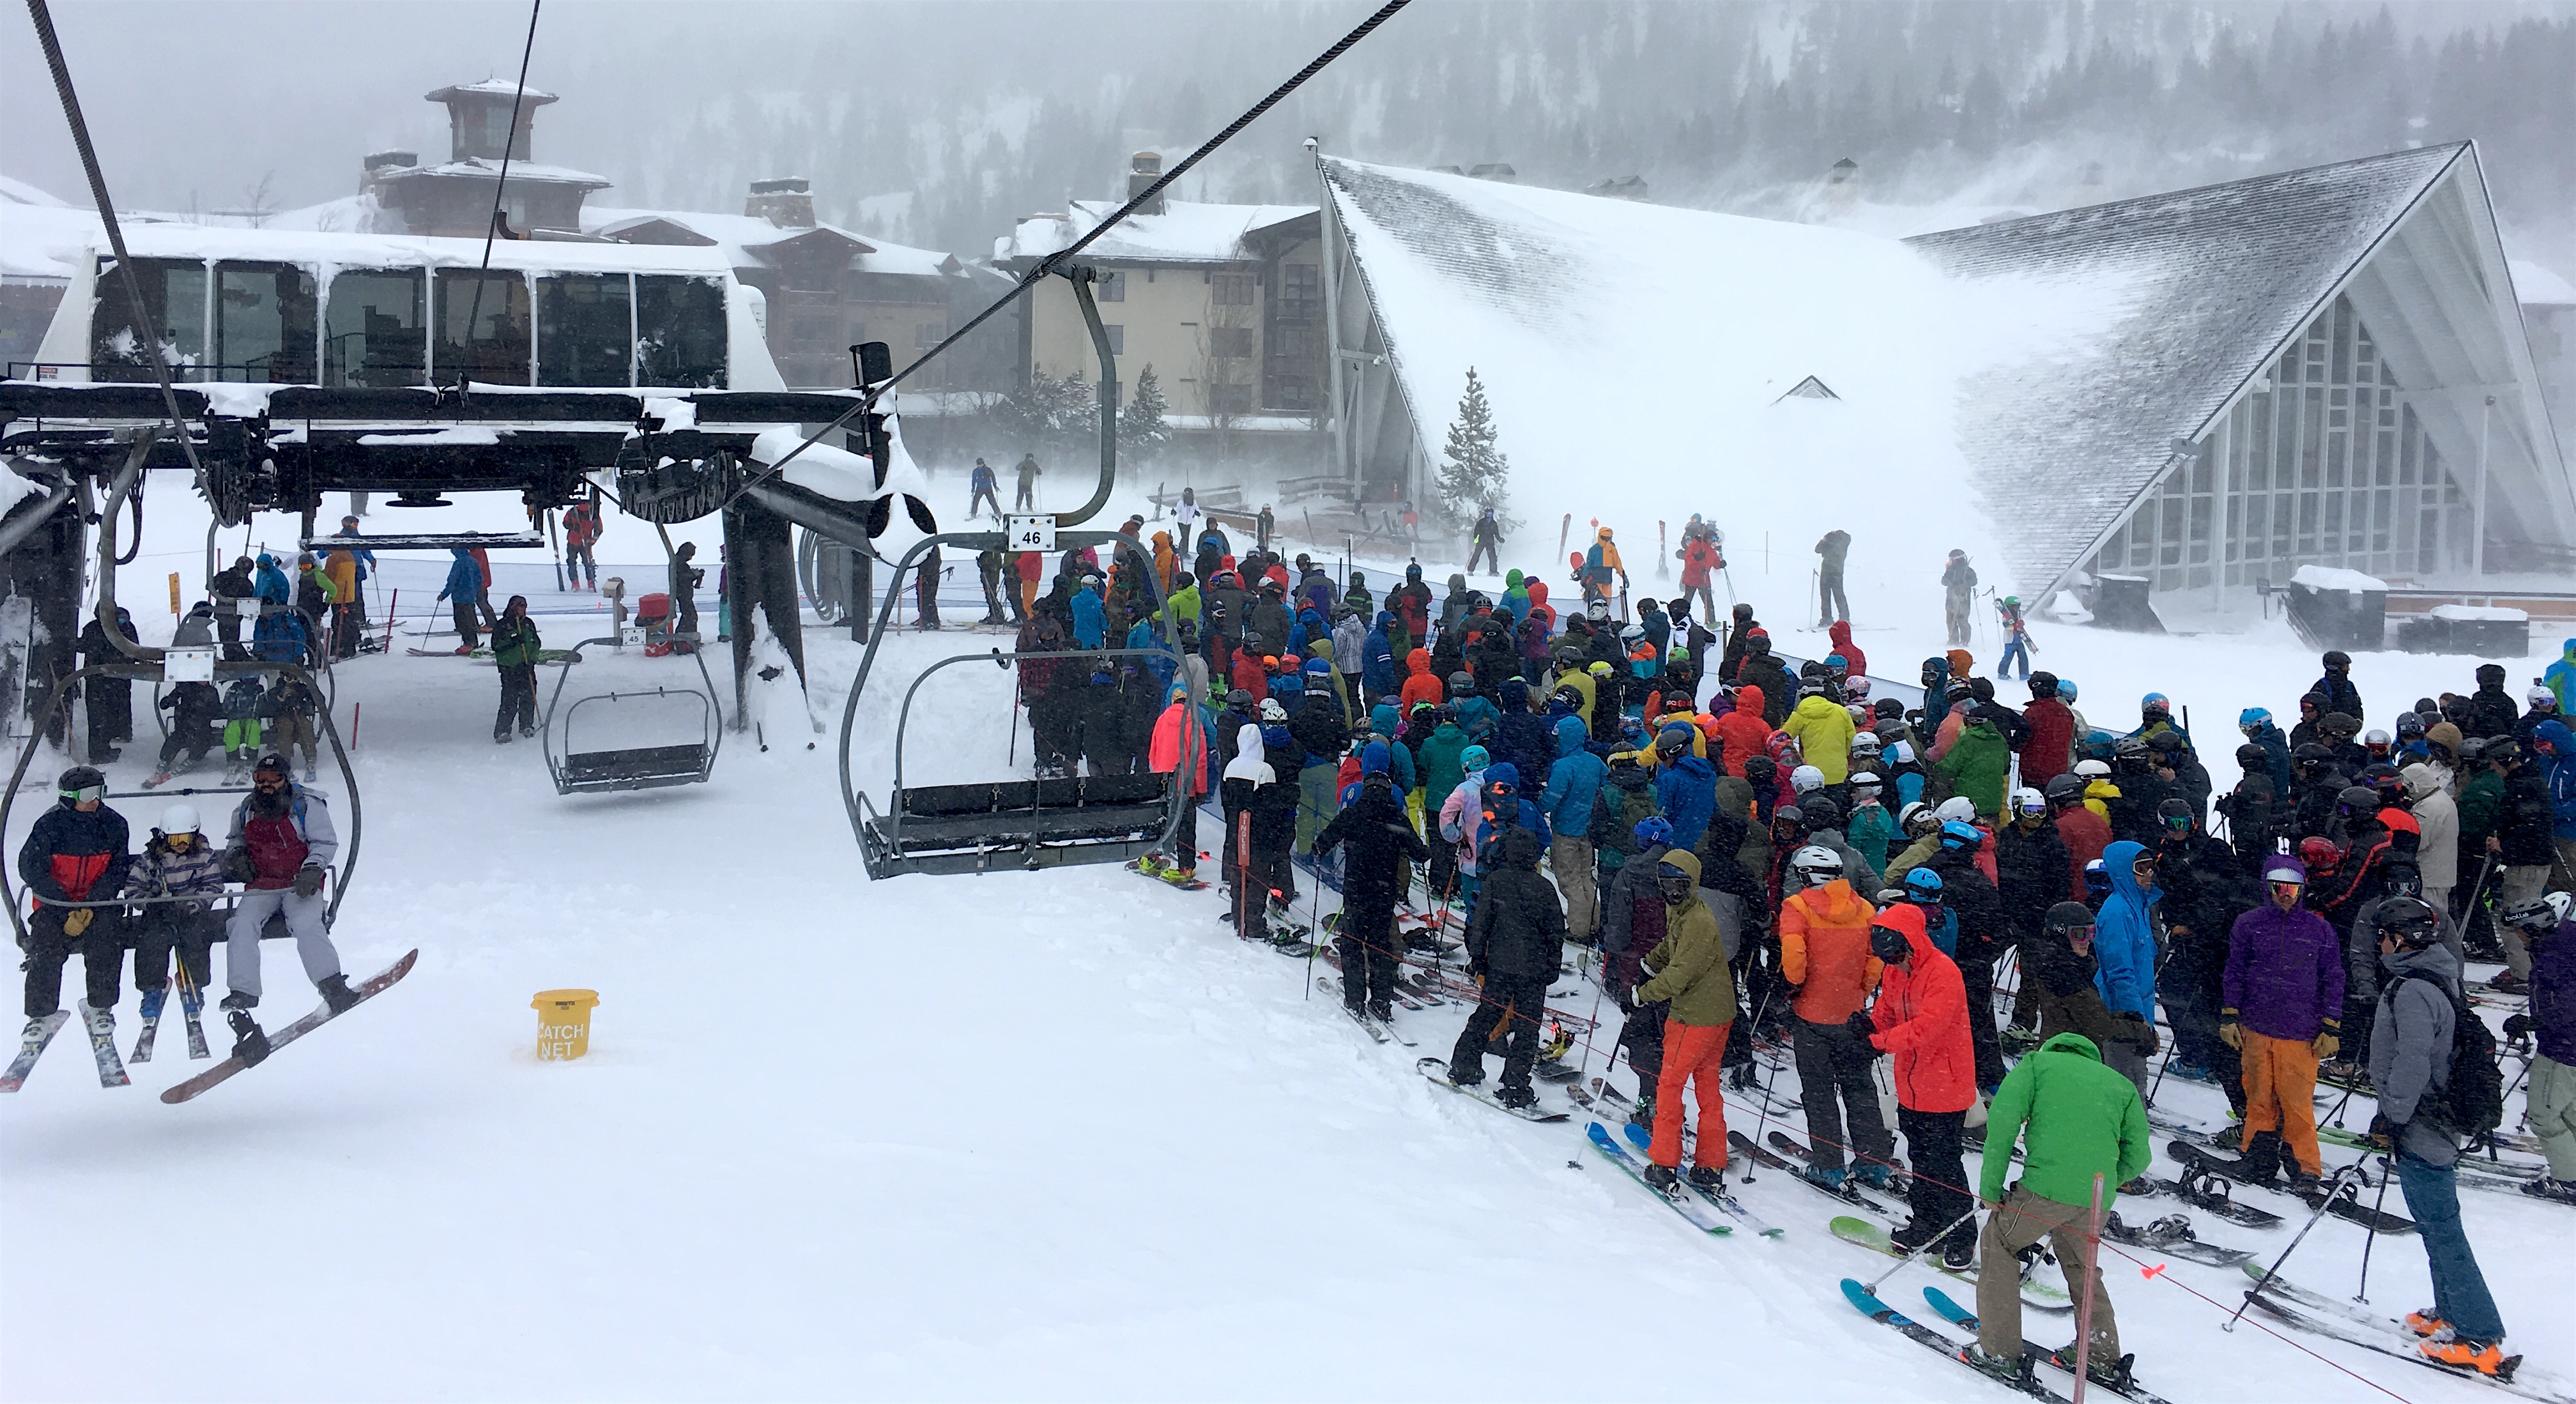 Squaw skittles at Red Dog yesterday at 1:30pm. photo: snowbrains